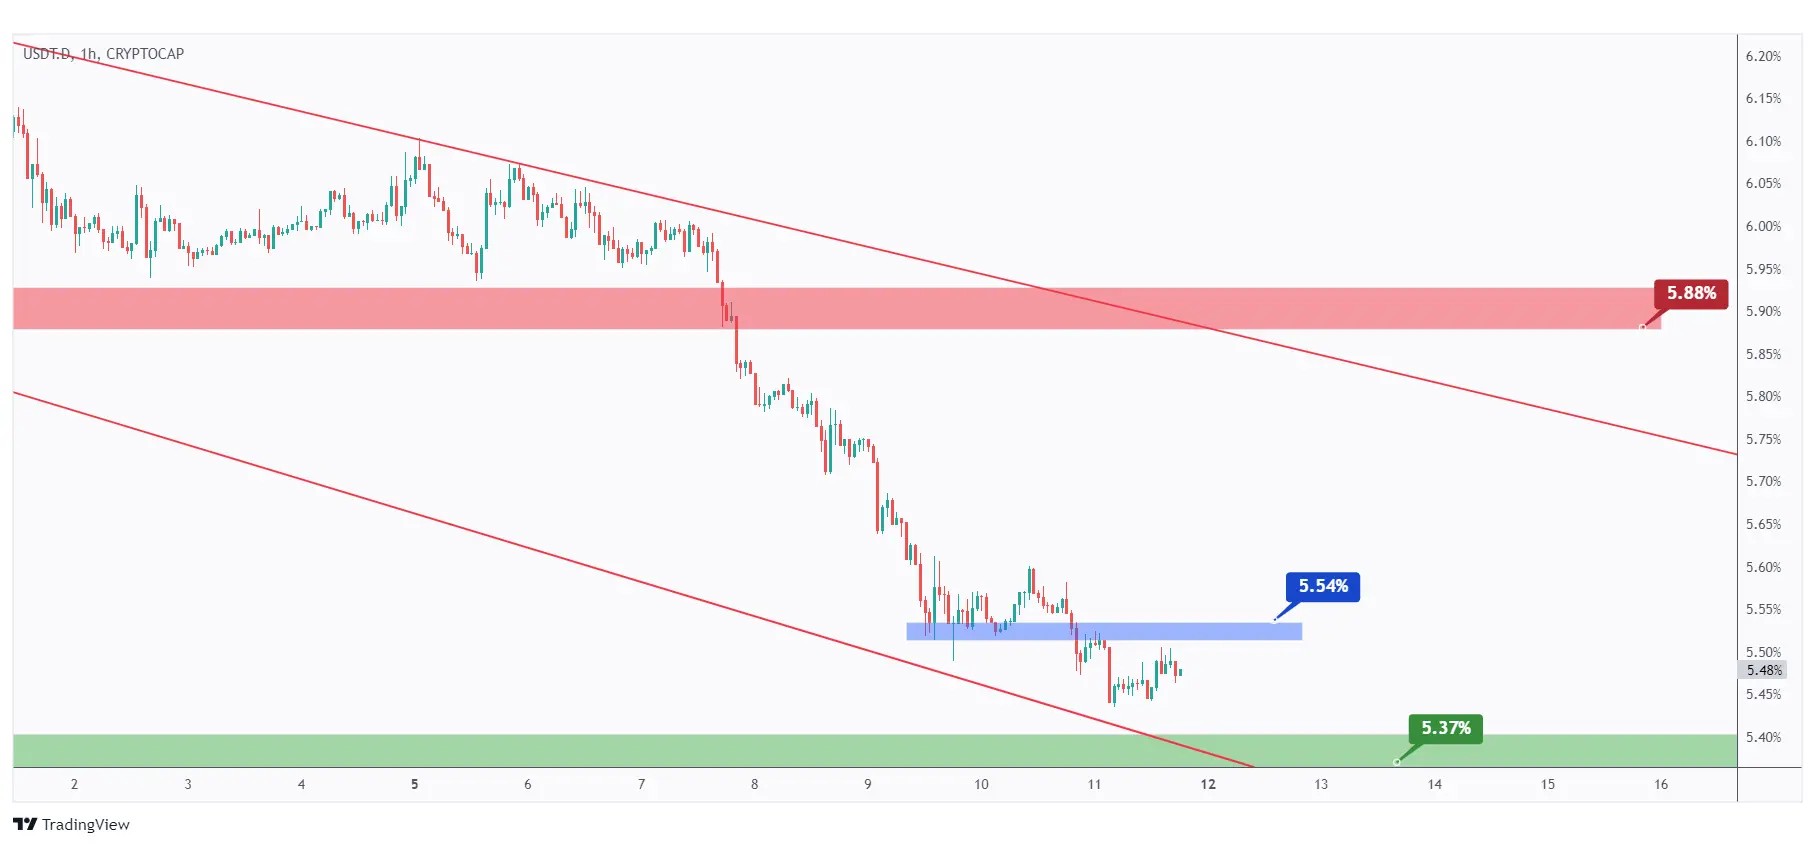 usdt dominance showing the last major high at 5.54% that we need a break above for the bulls to take over.